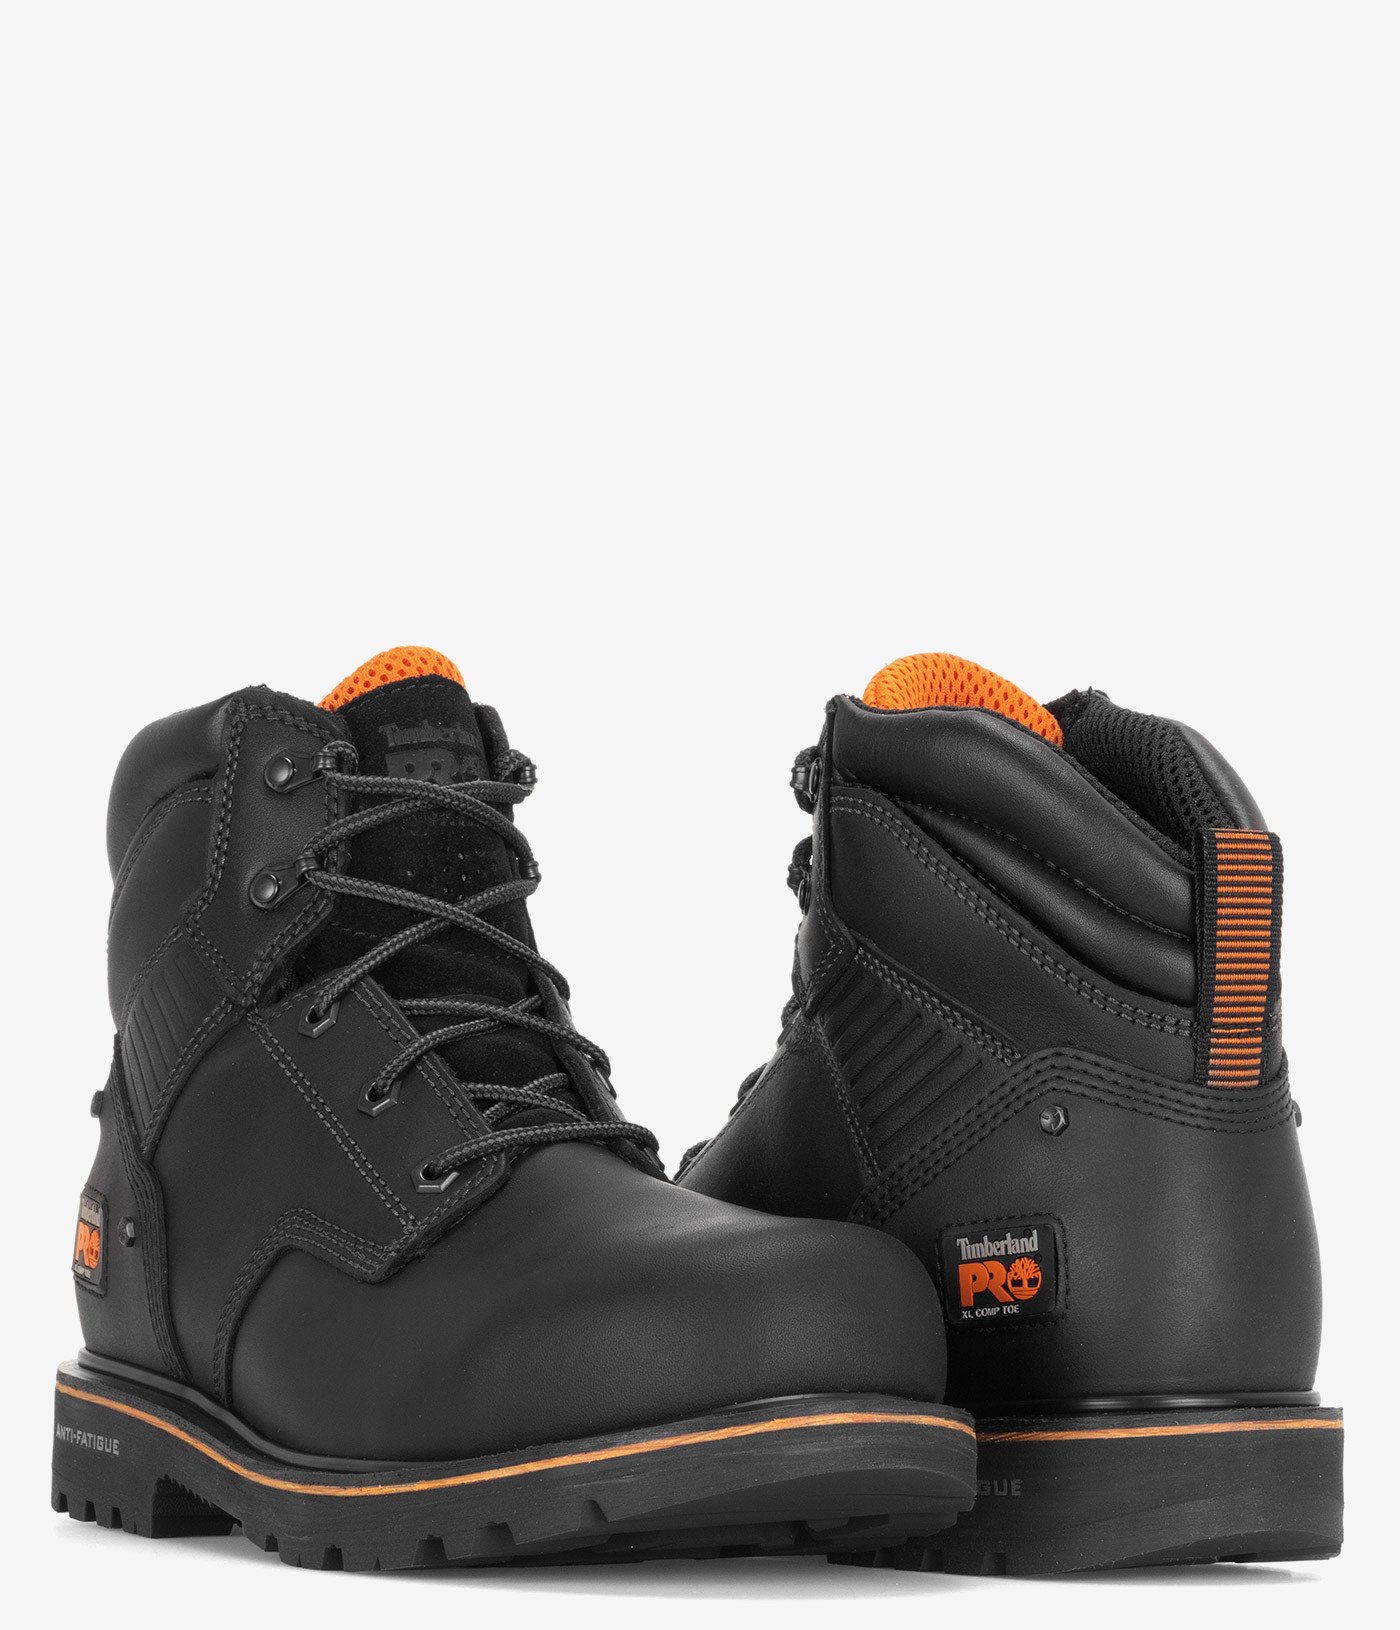 Timberland PRO Ballast 6" Composite Safety Toe Work Boot